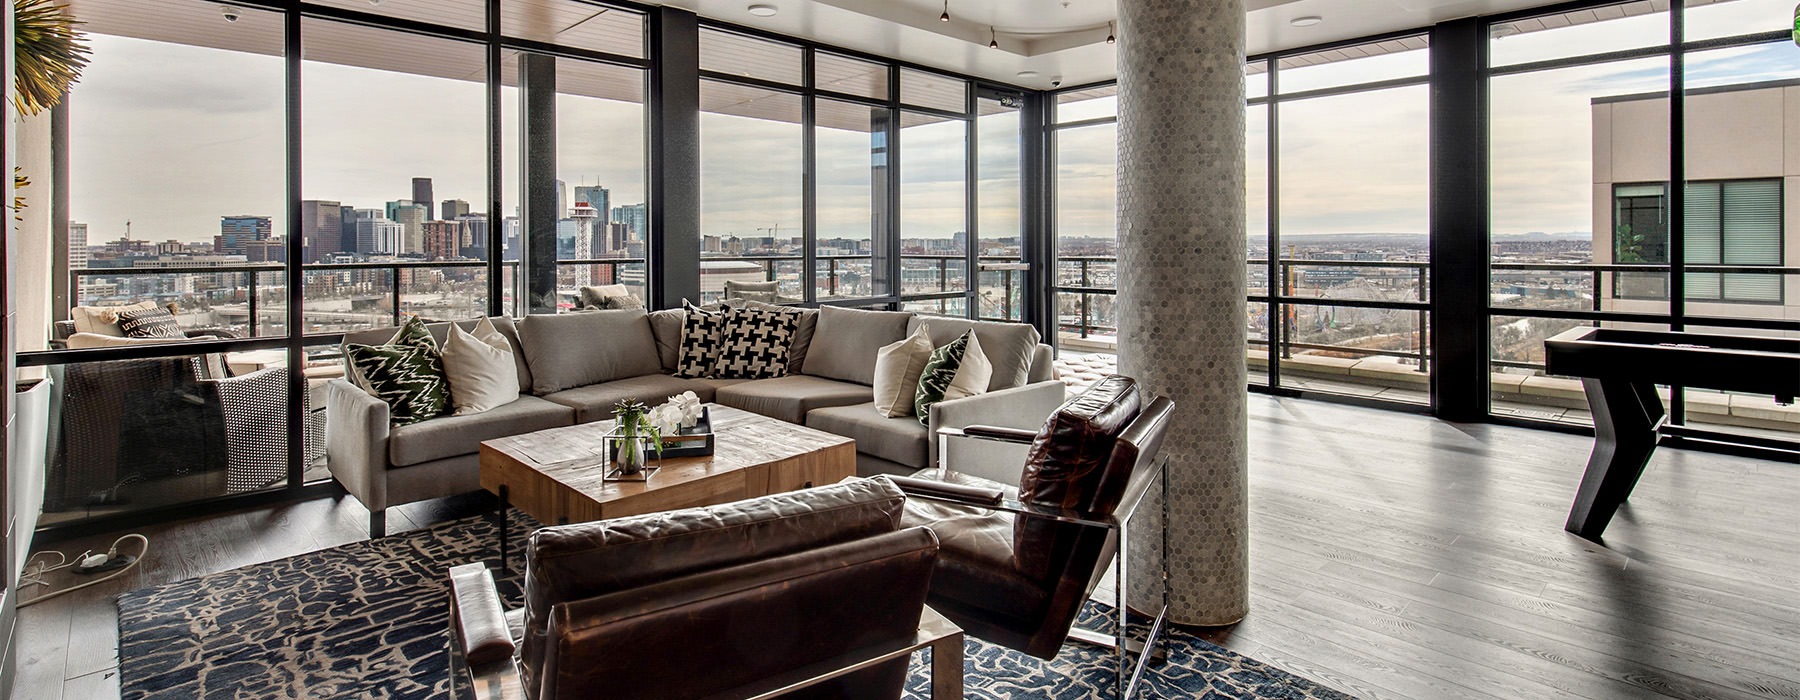 Lounge area in the leasing center overlooking the cityscape 